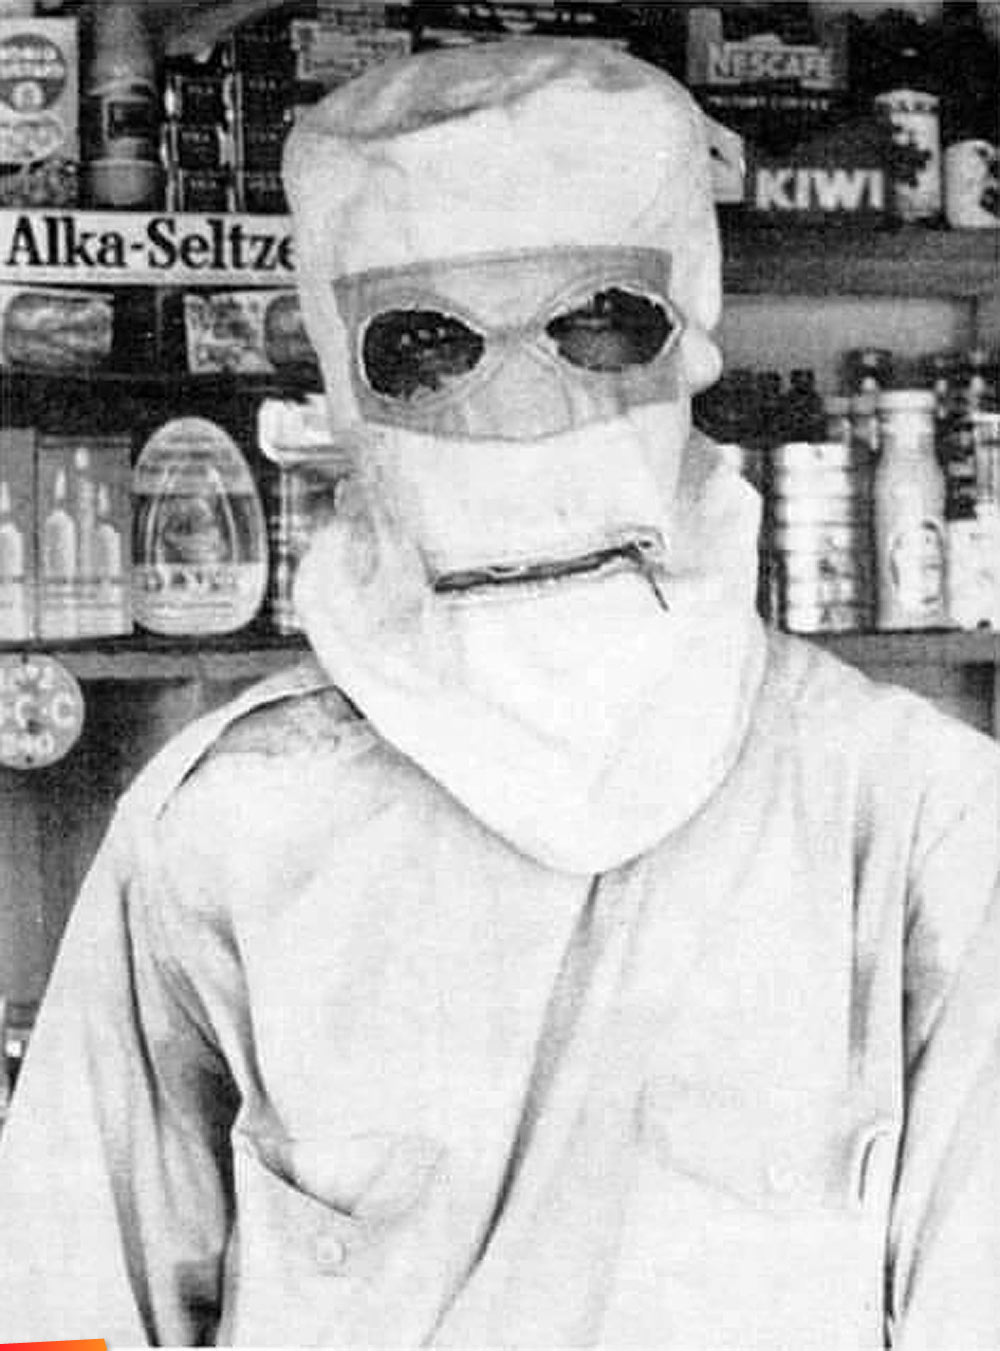 Mask Man in his shop in Belize City, 1960's